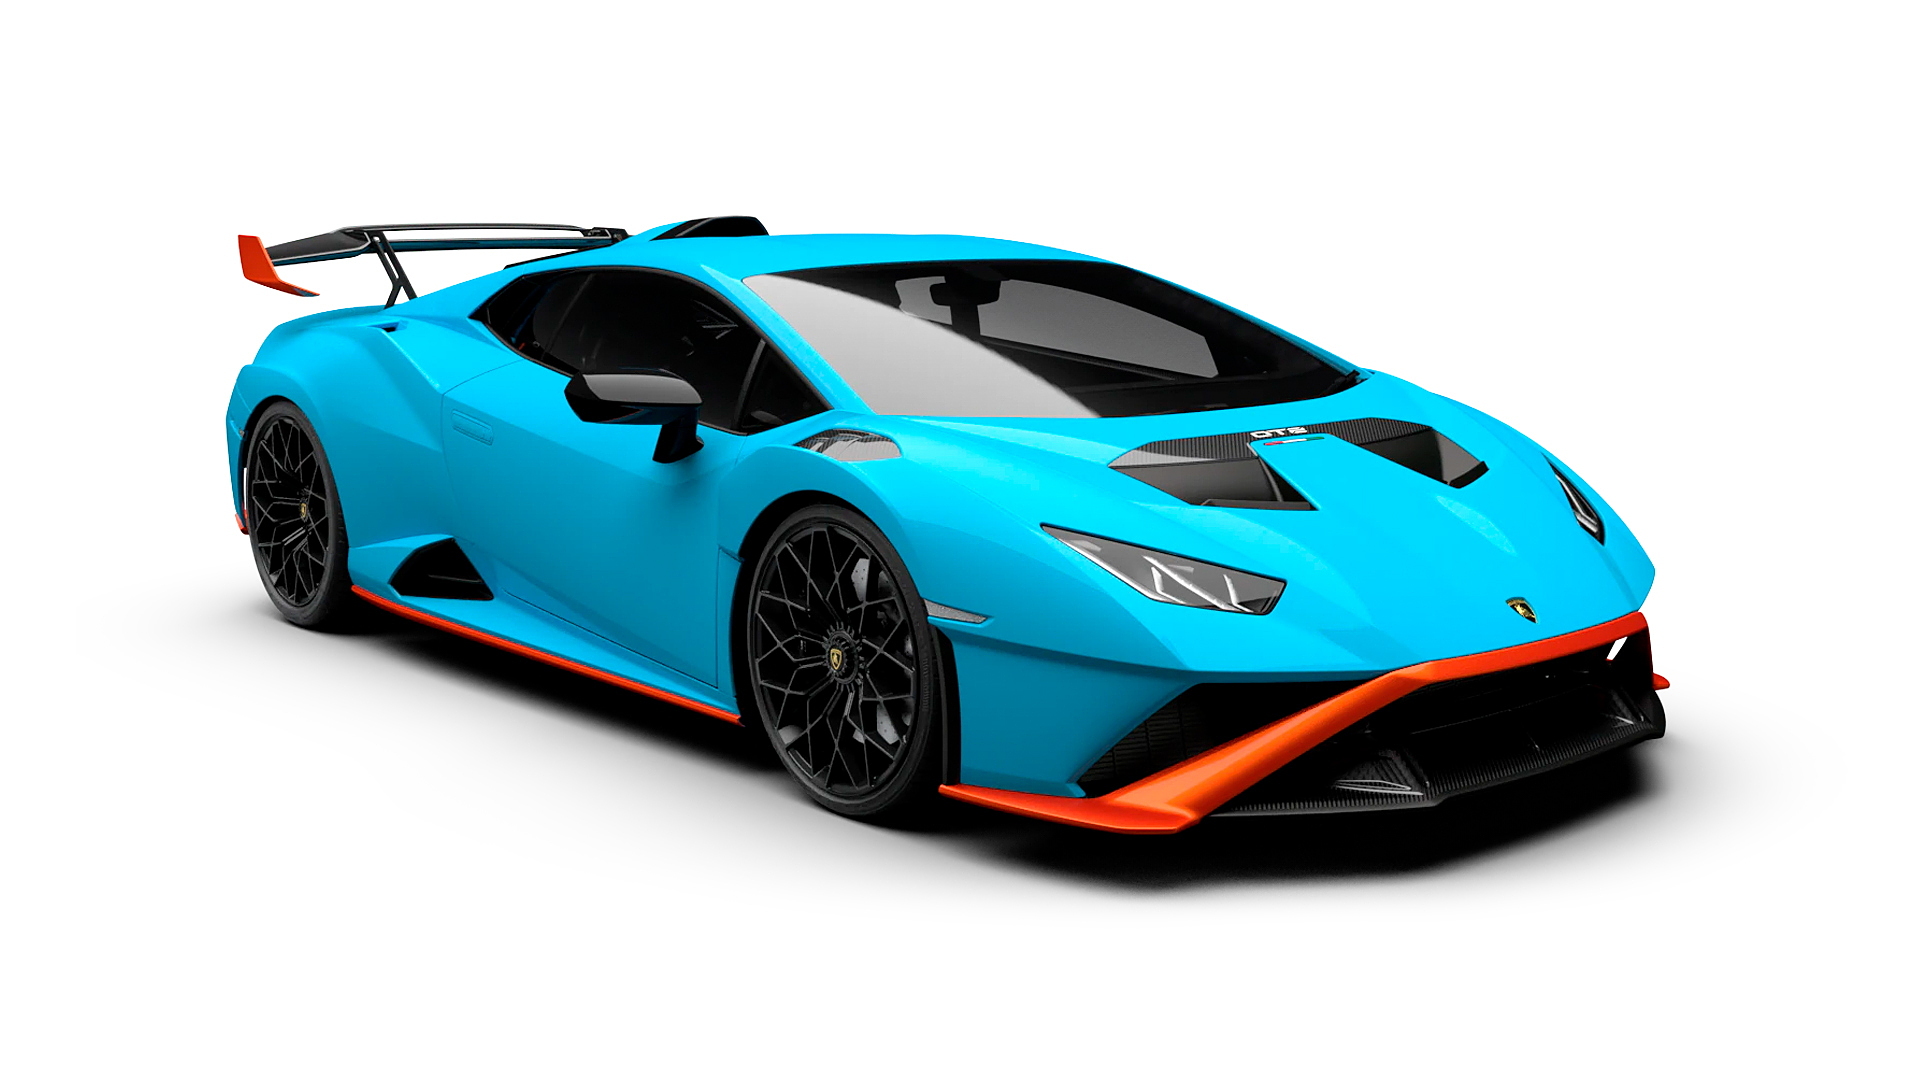 Huracan STO Special Edition on road Price | Lamborghini Huracan STO Special  Edition Features & Specs